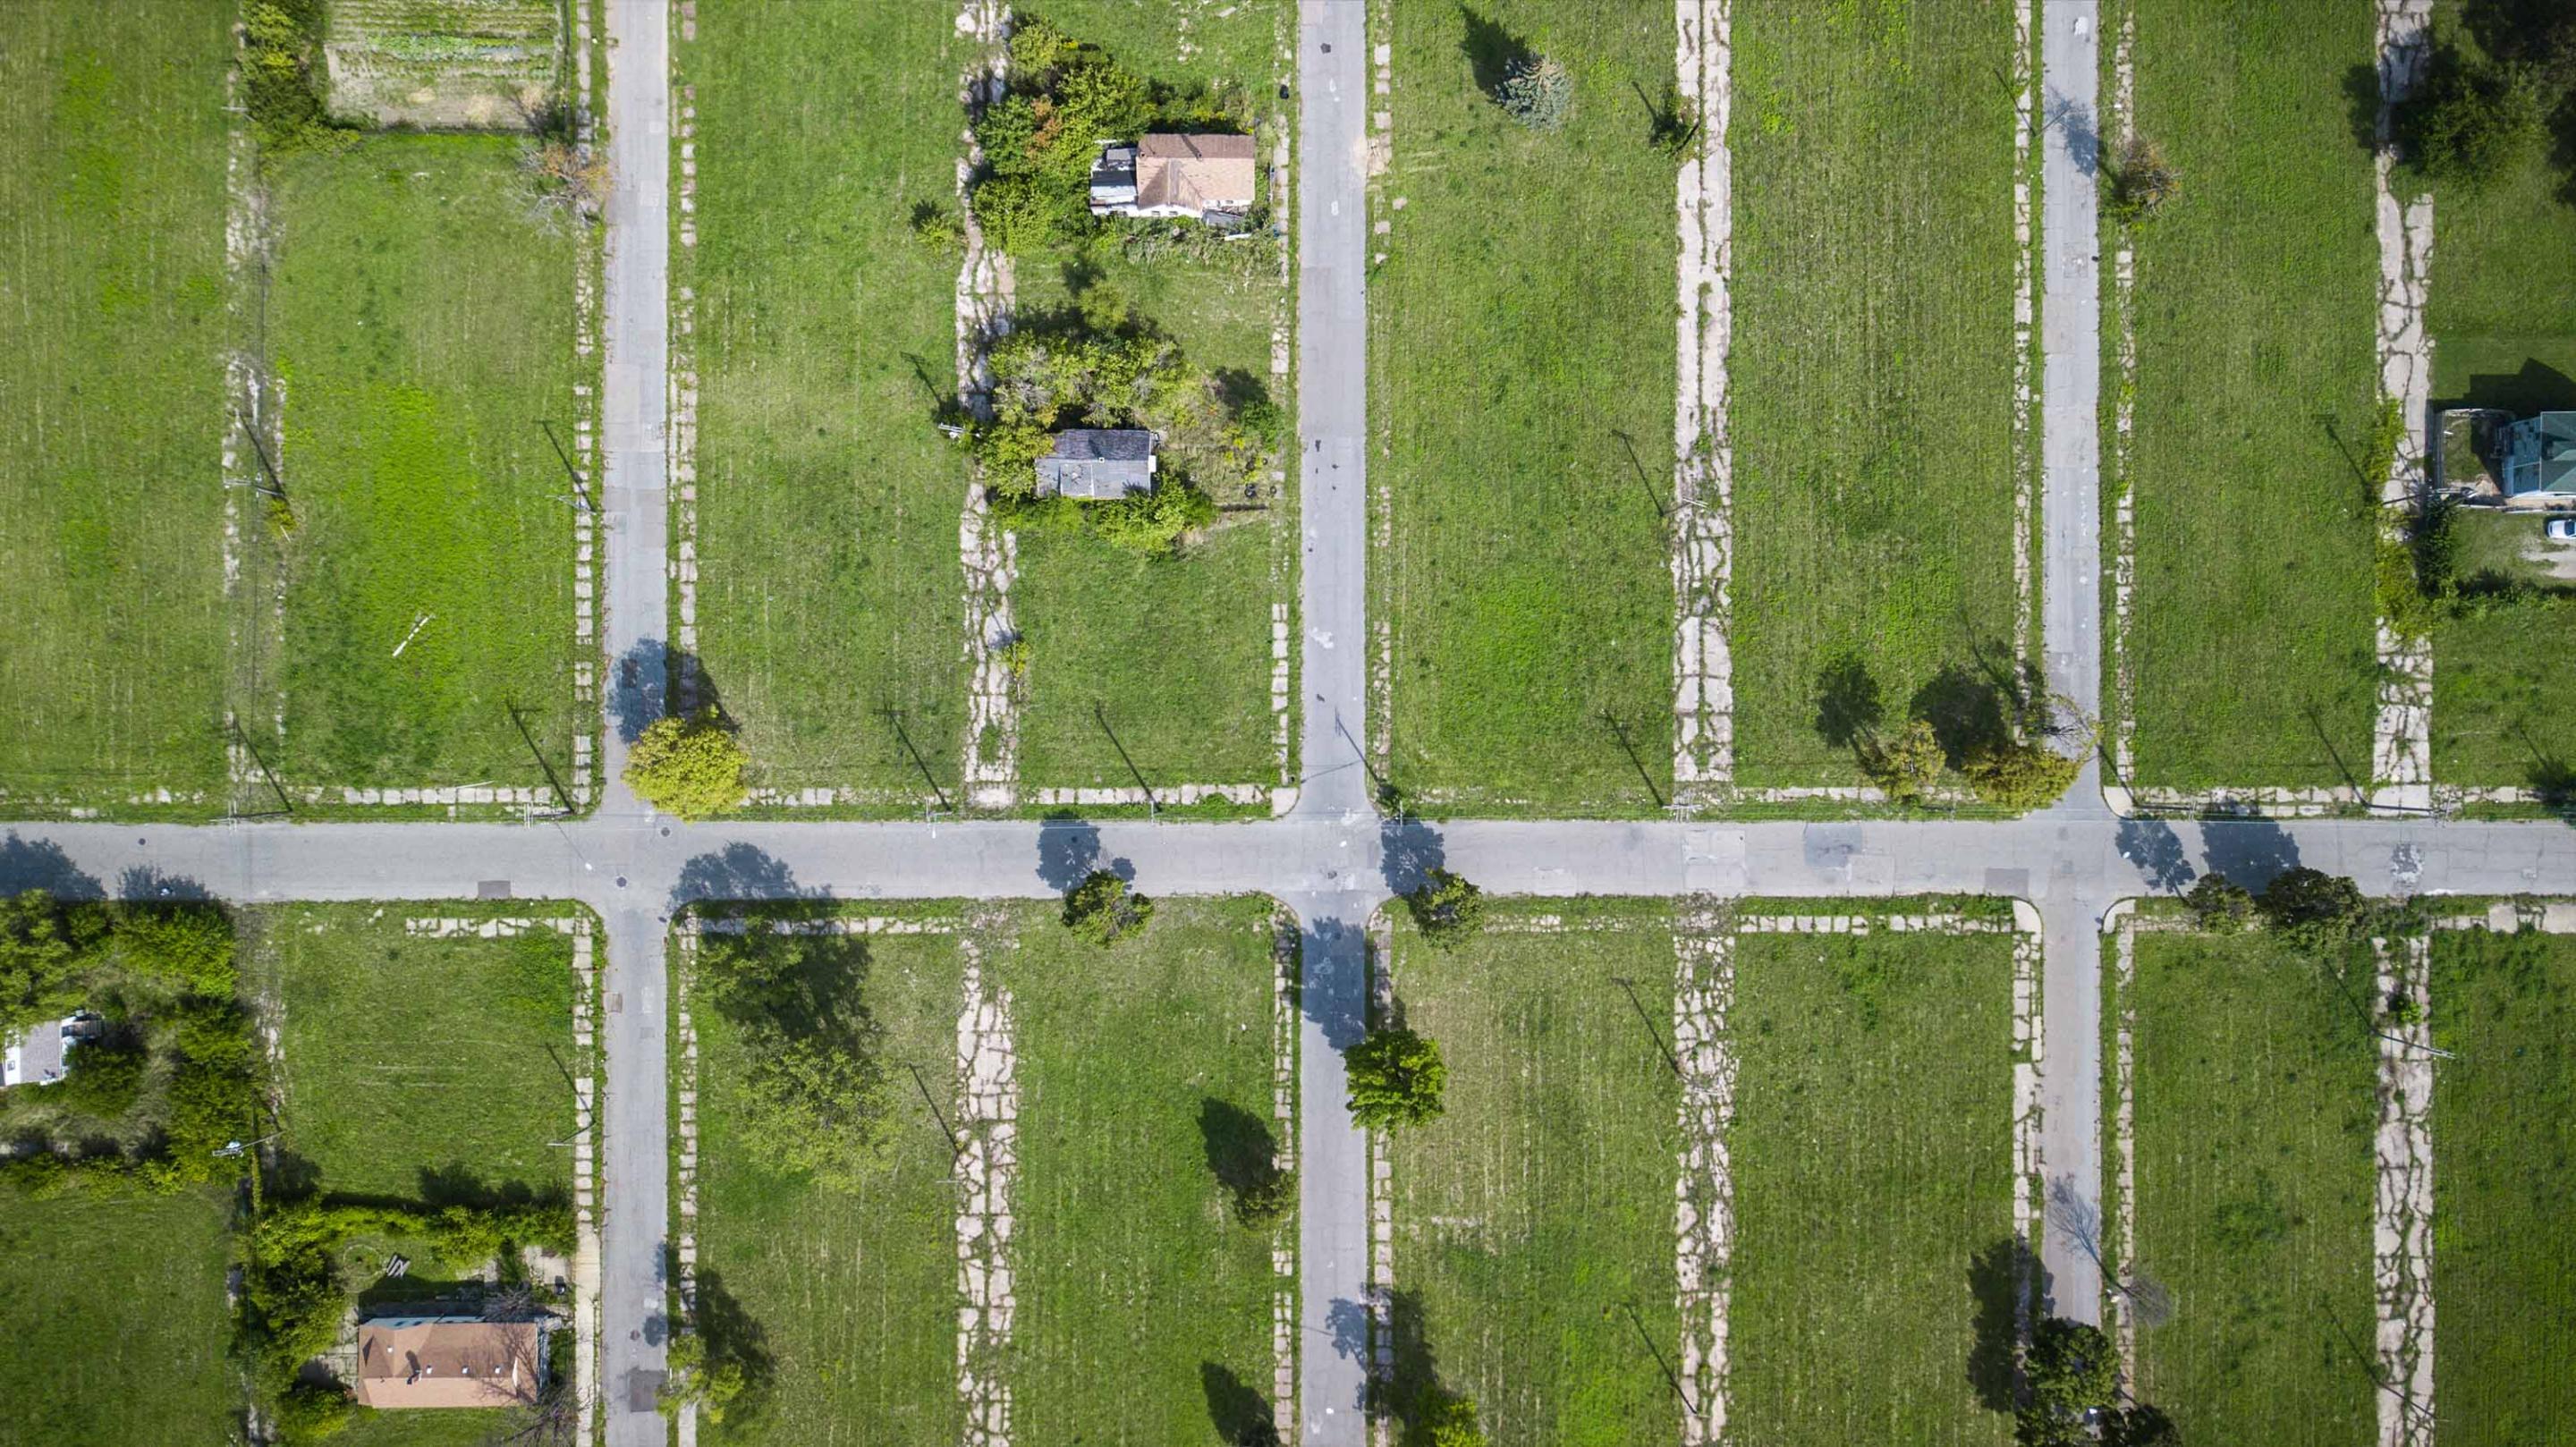 Street rows surrounded by grass and 3 houses.